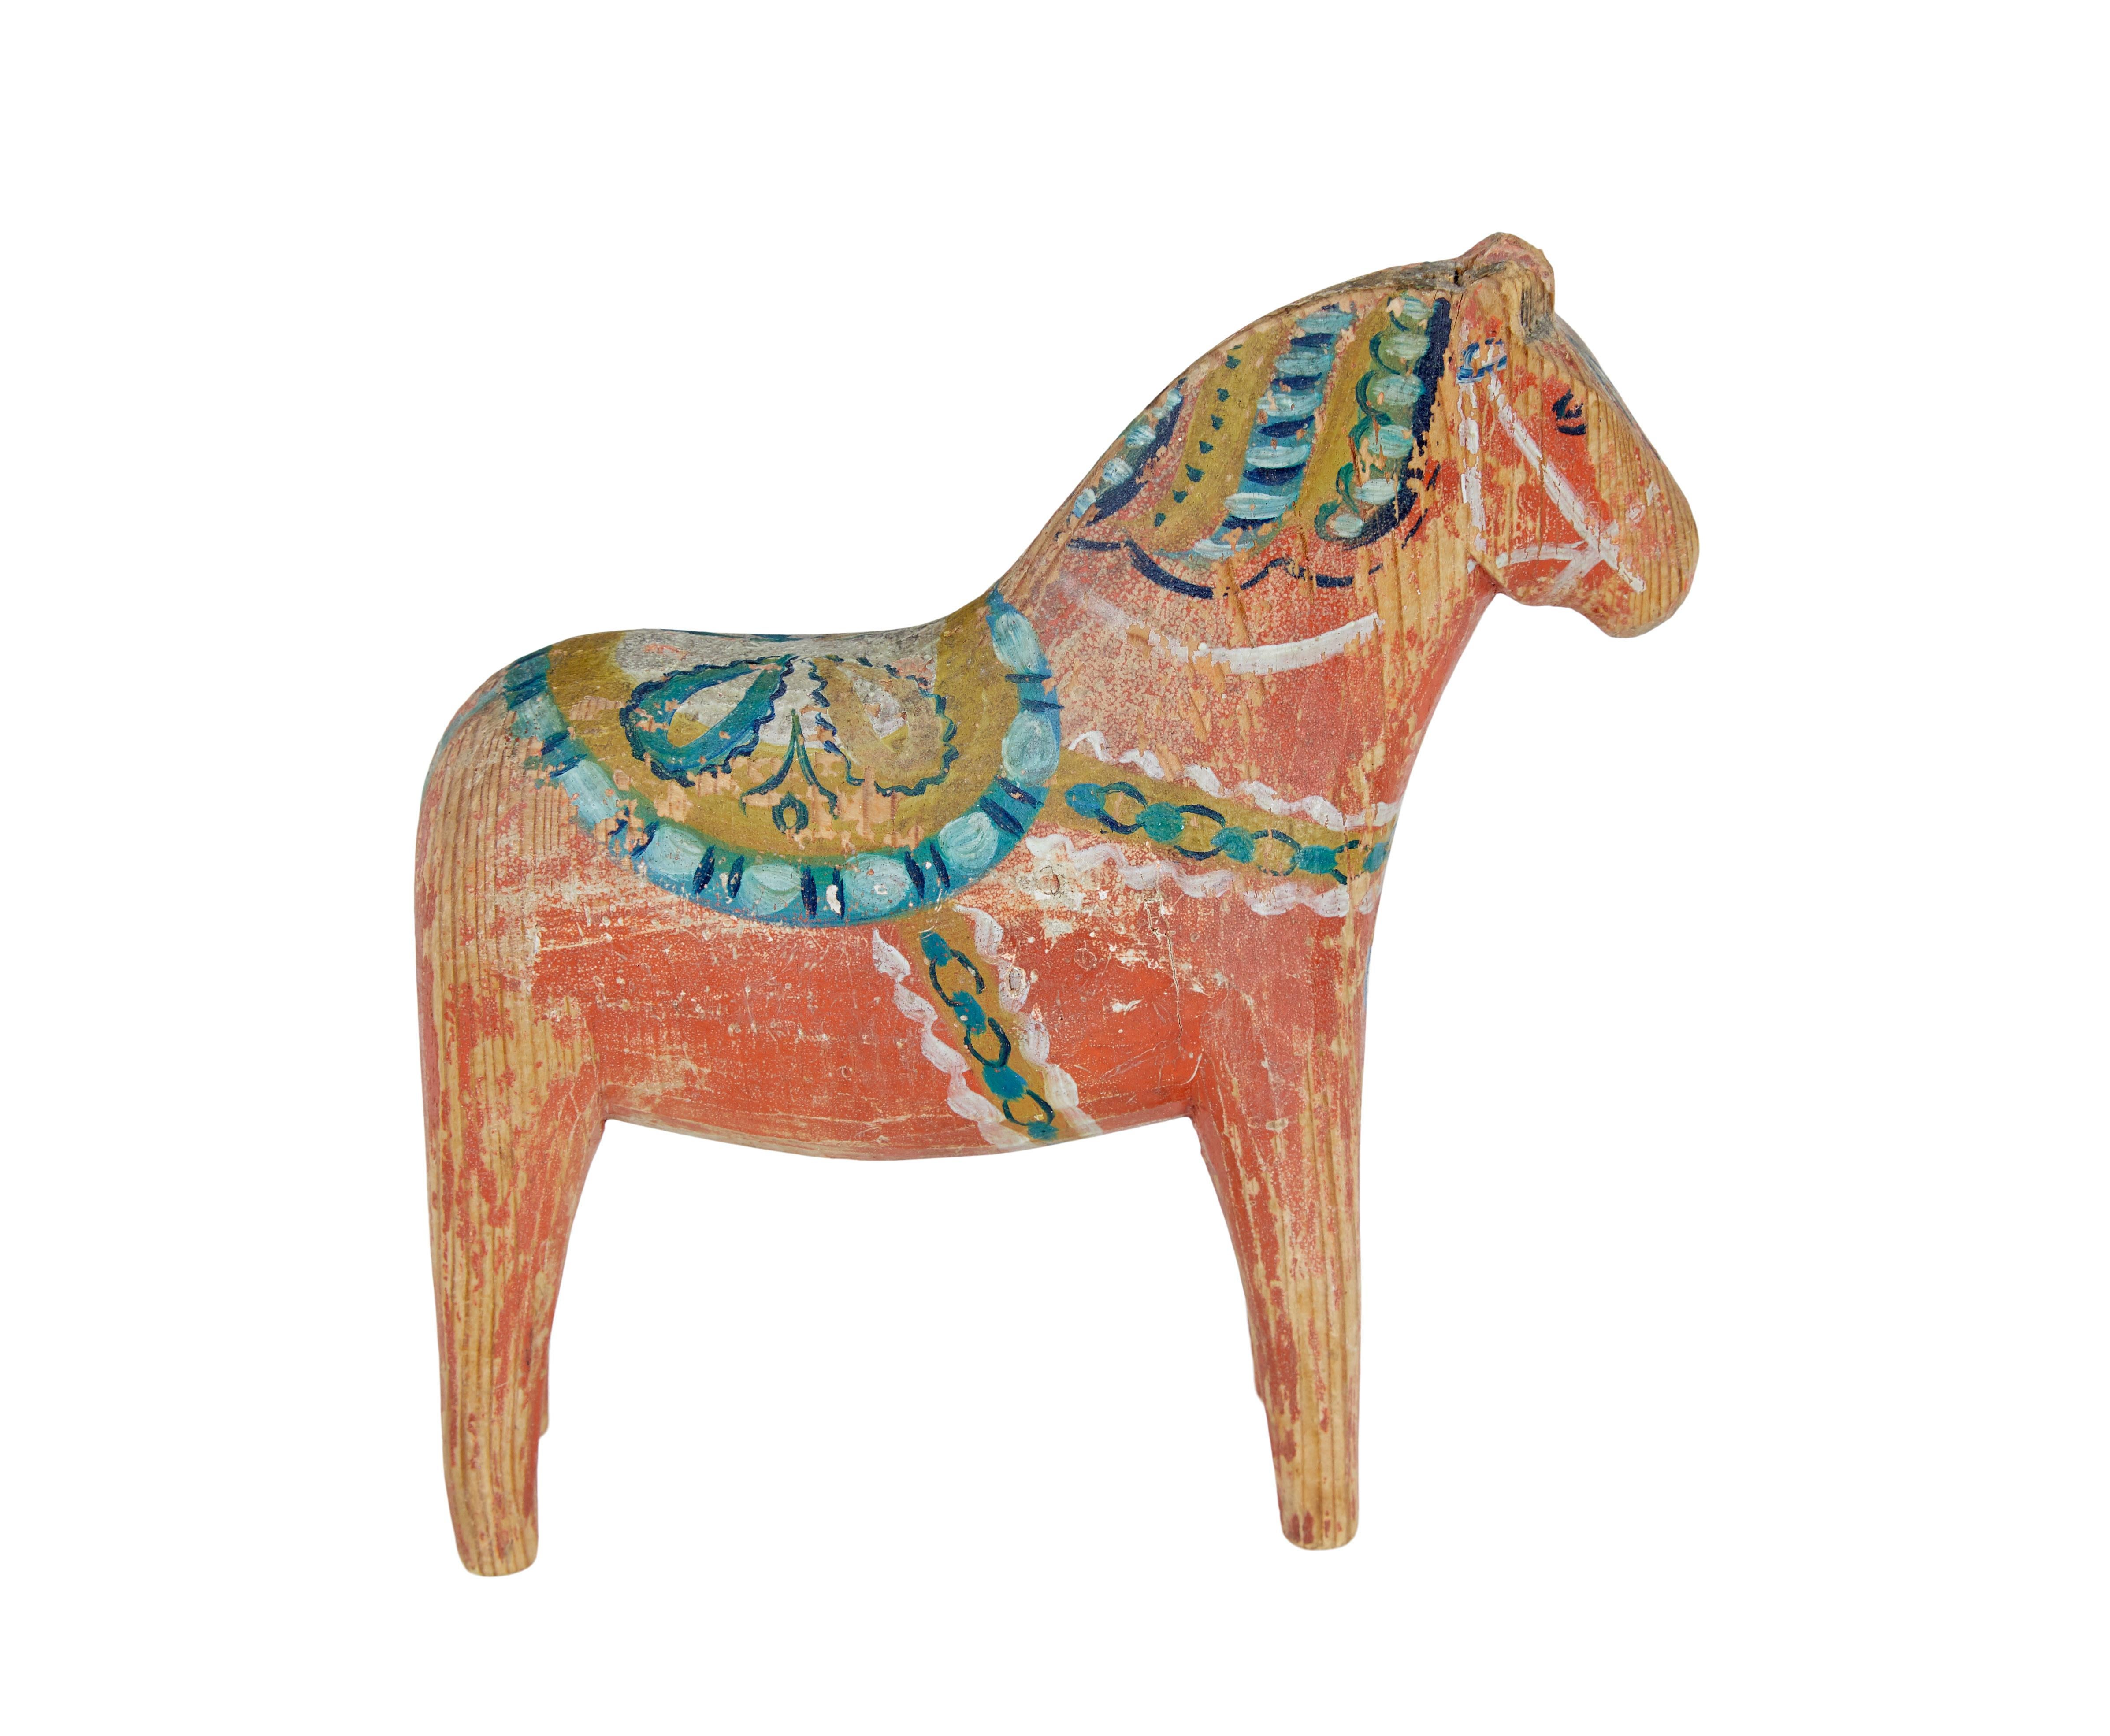 19th century hand painted Swedish Dala horse circa 1890.

Fine quality example bought from a collector of Swedish folk art.  Traditionally whittled in pine and hand painted using a 2 brush technique.  Typically being made in the Dalarna region of